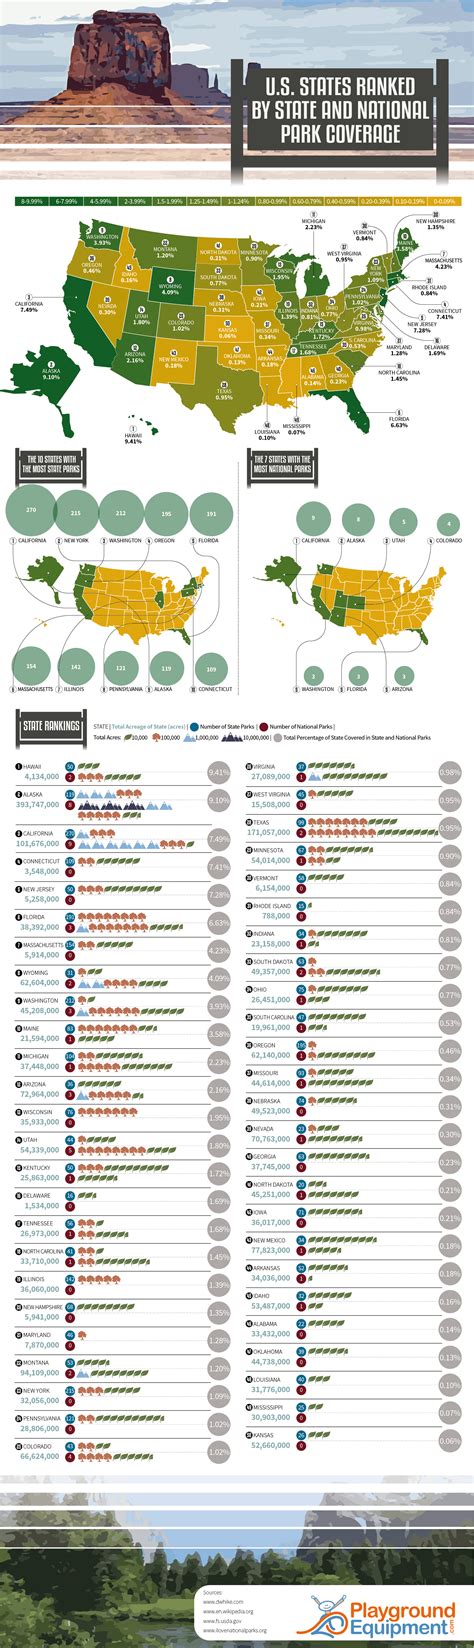 Us States Ranked By Their State And National Park Coverage Nationalpark